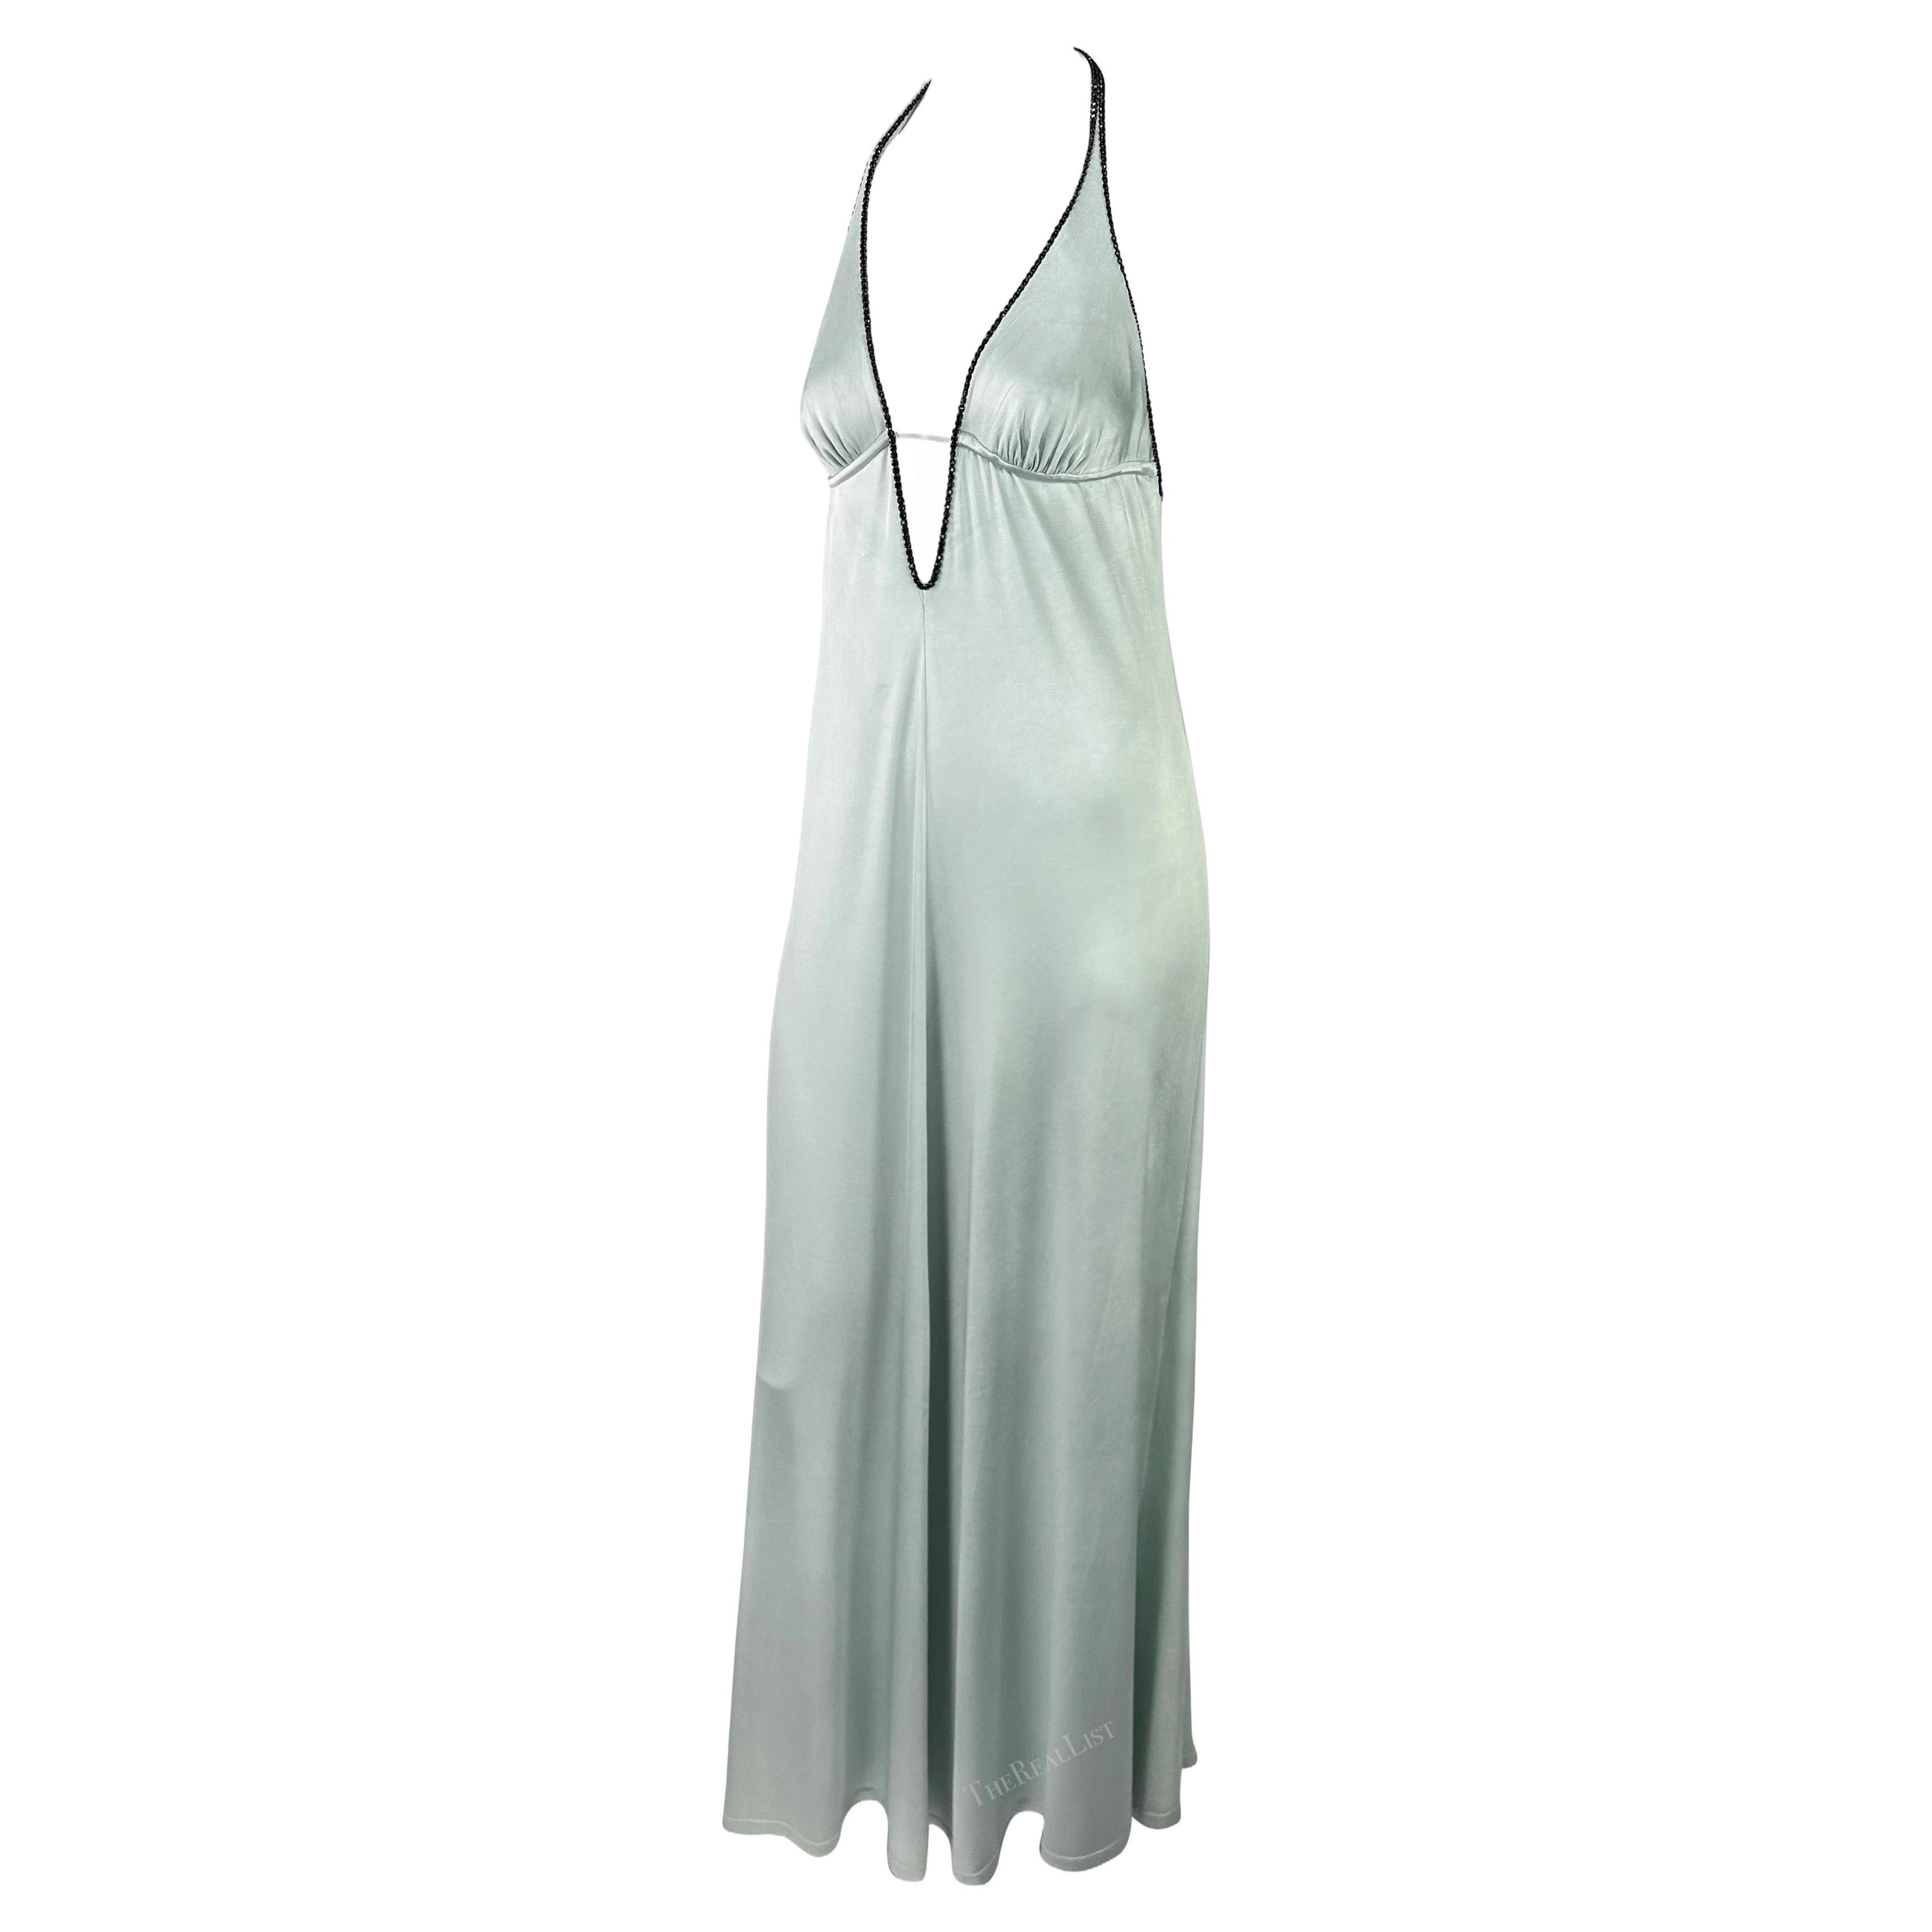 S/S 2000 Paco Rabanne Light Blue Satin Black Rhinestone Backless Halter Gown In Good Condition For Sale In West Hollywood, CA